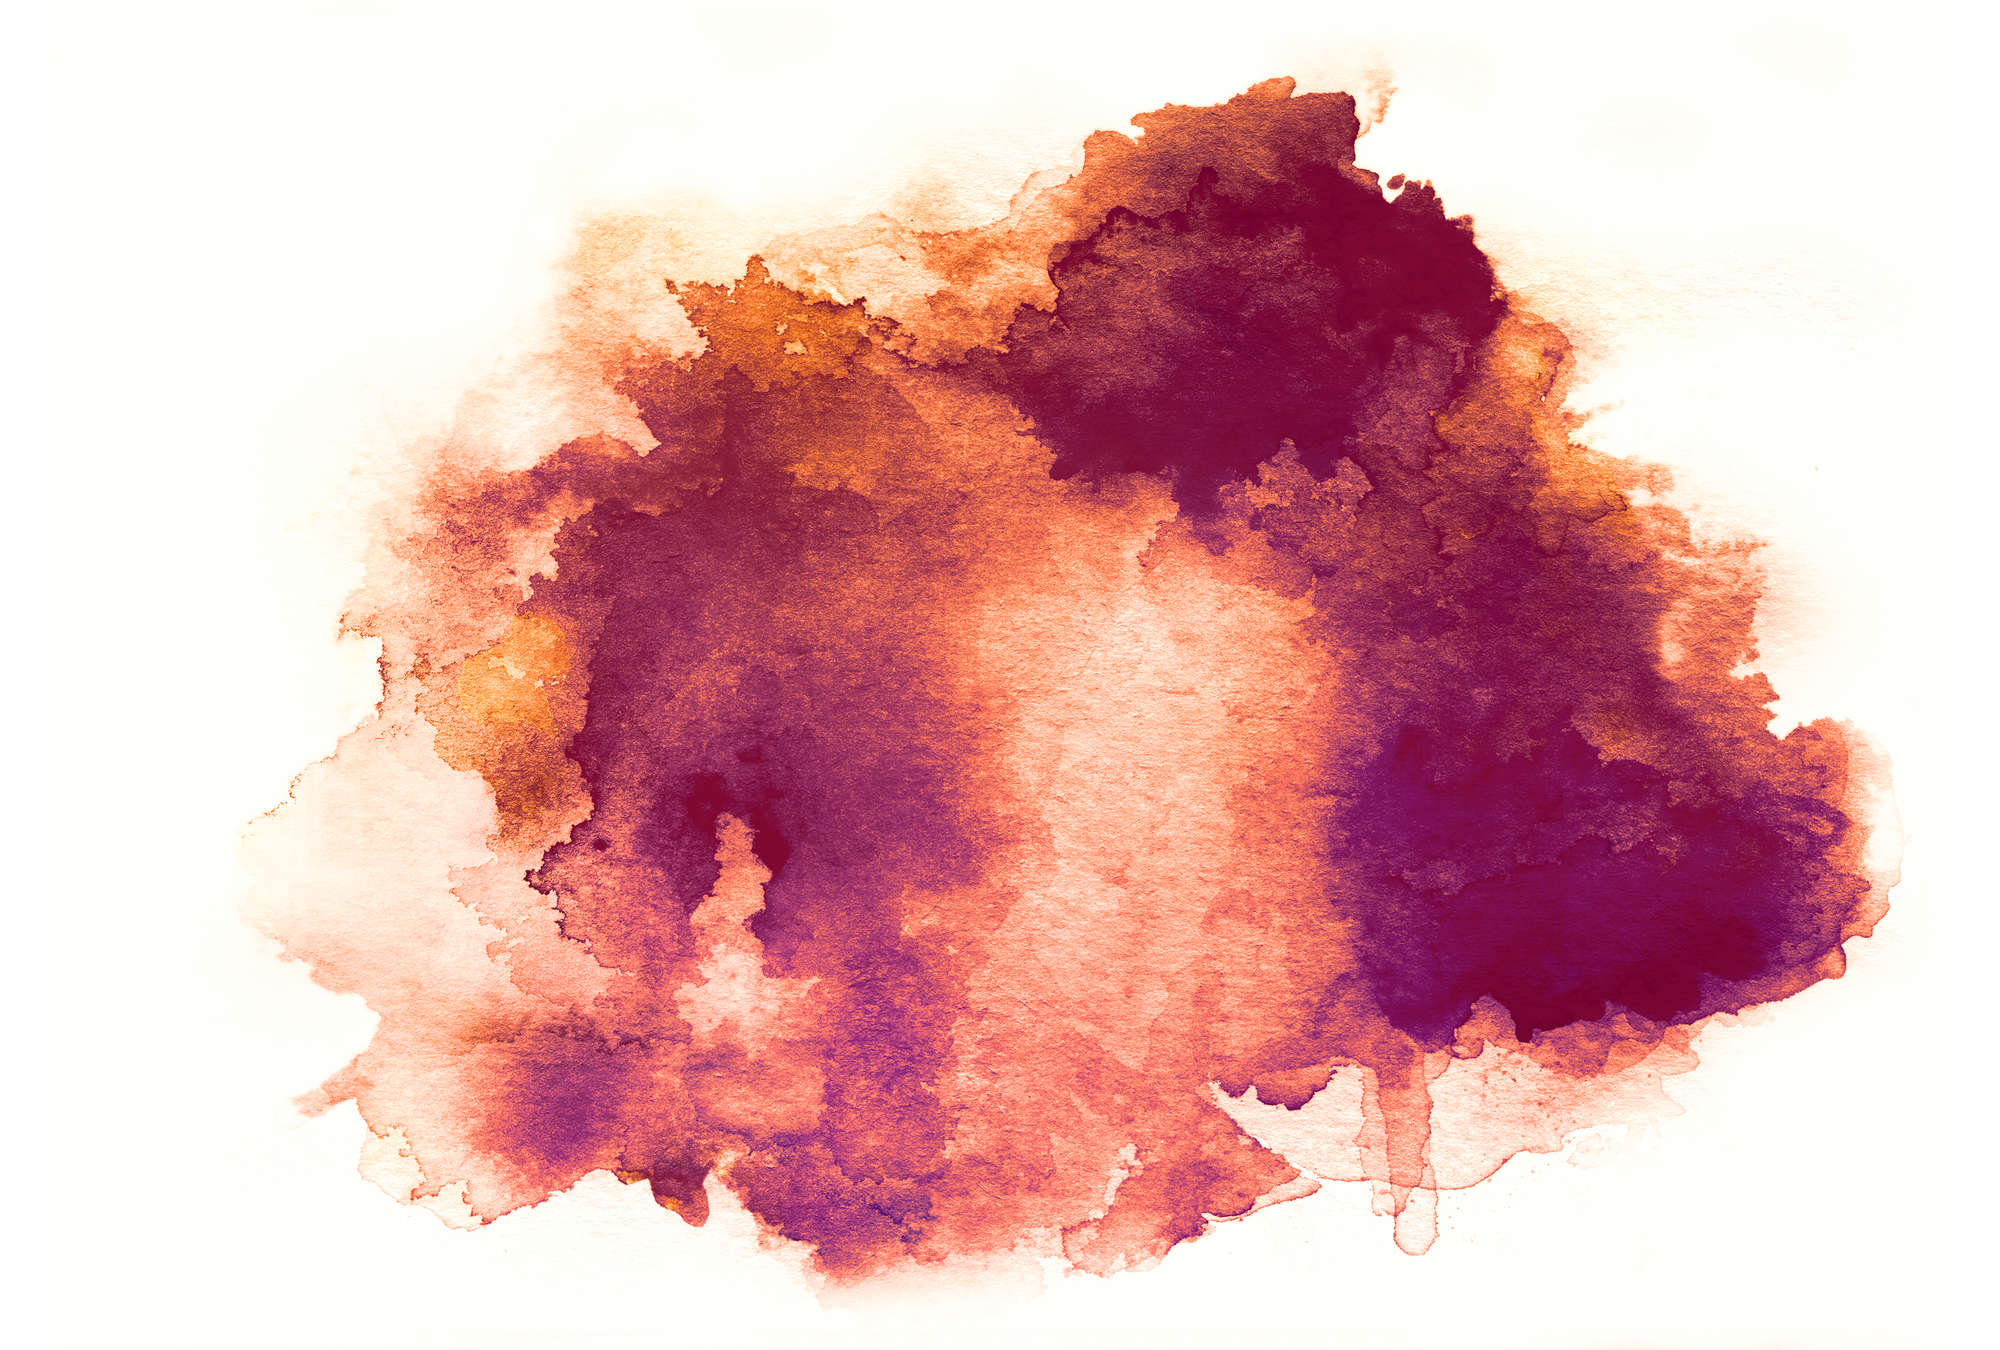             Watercolour stain red gradient mural
        